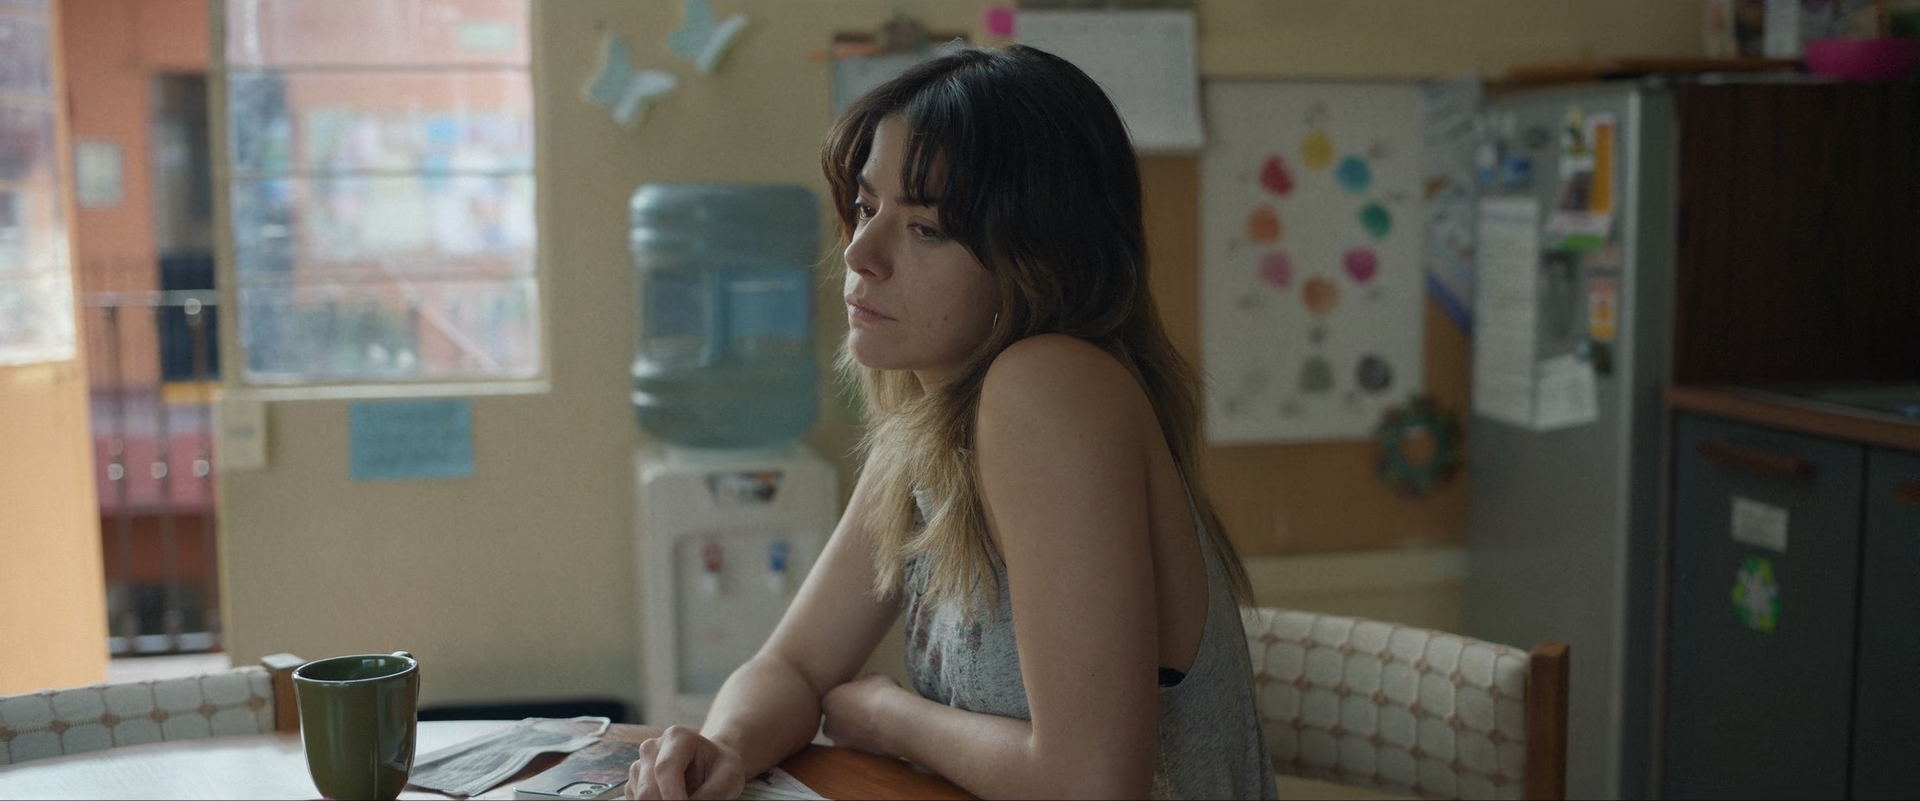 A still from All the Silence. Miriam is sitting in a breakroom and looking sad.